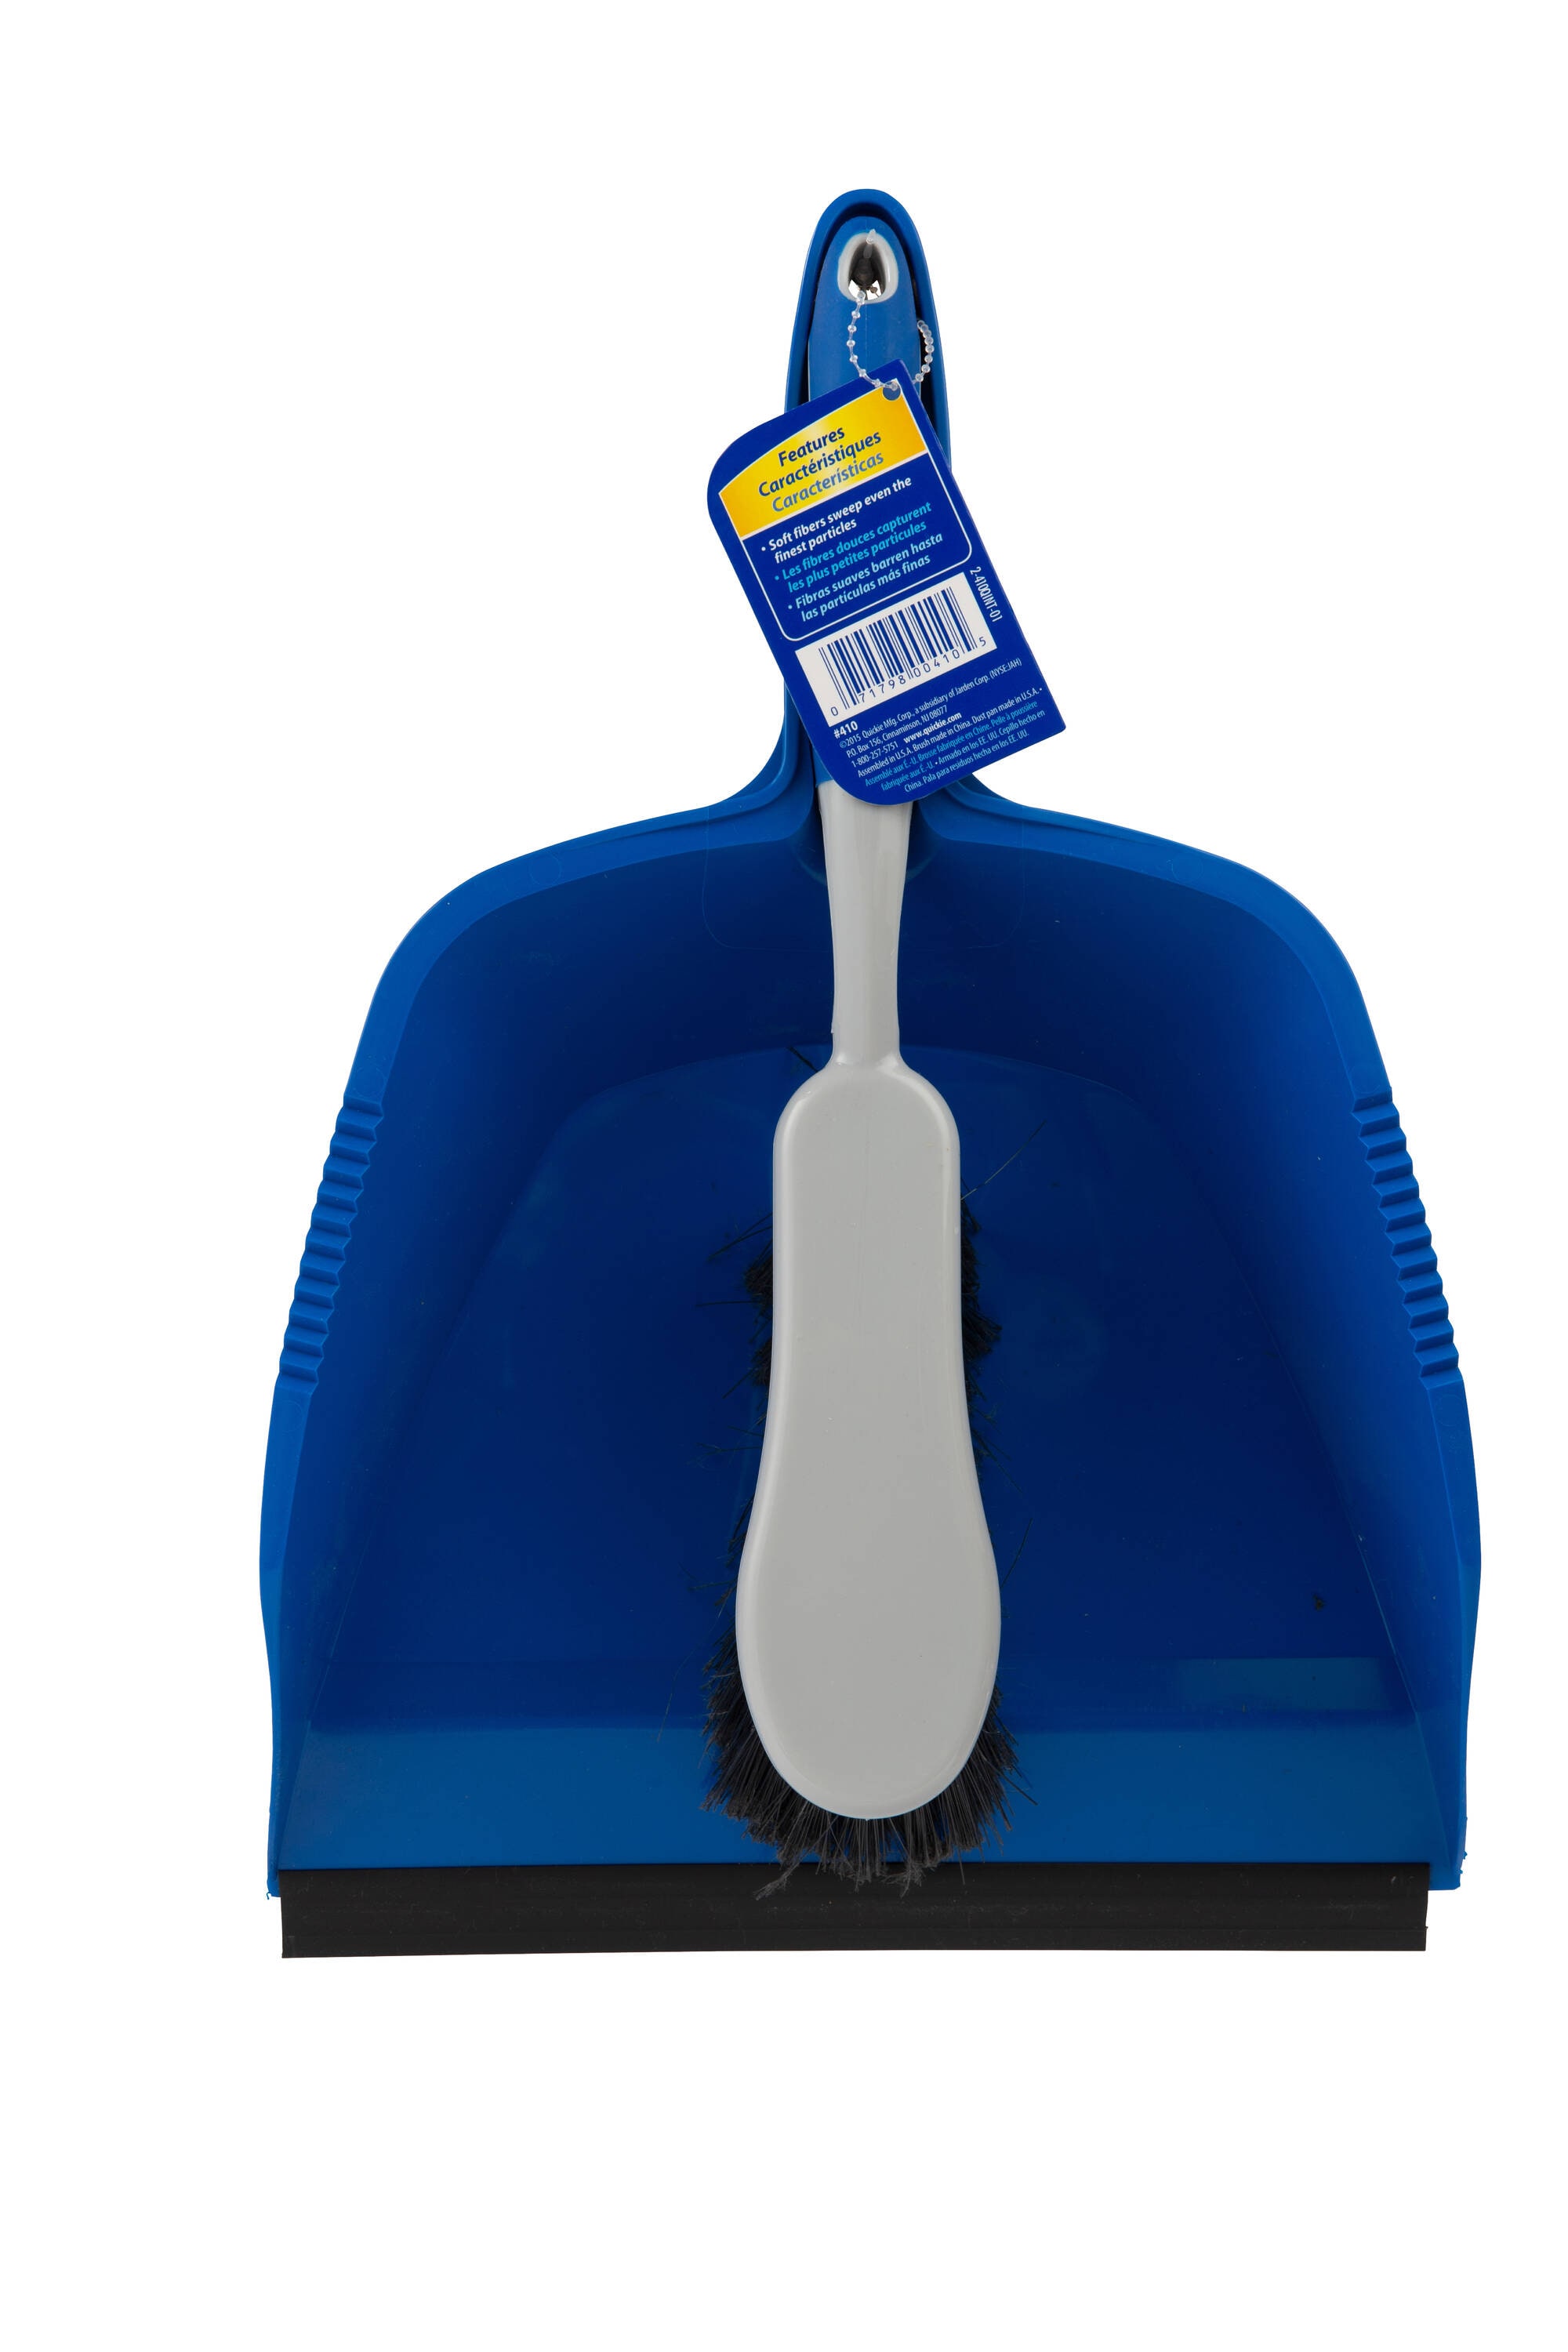 Dustpan and Broom Set plus Squeegee Dustpan Broom Combo with